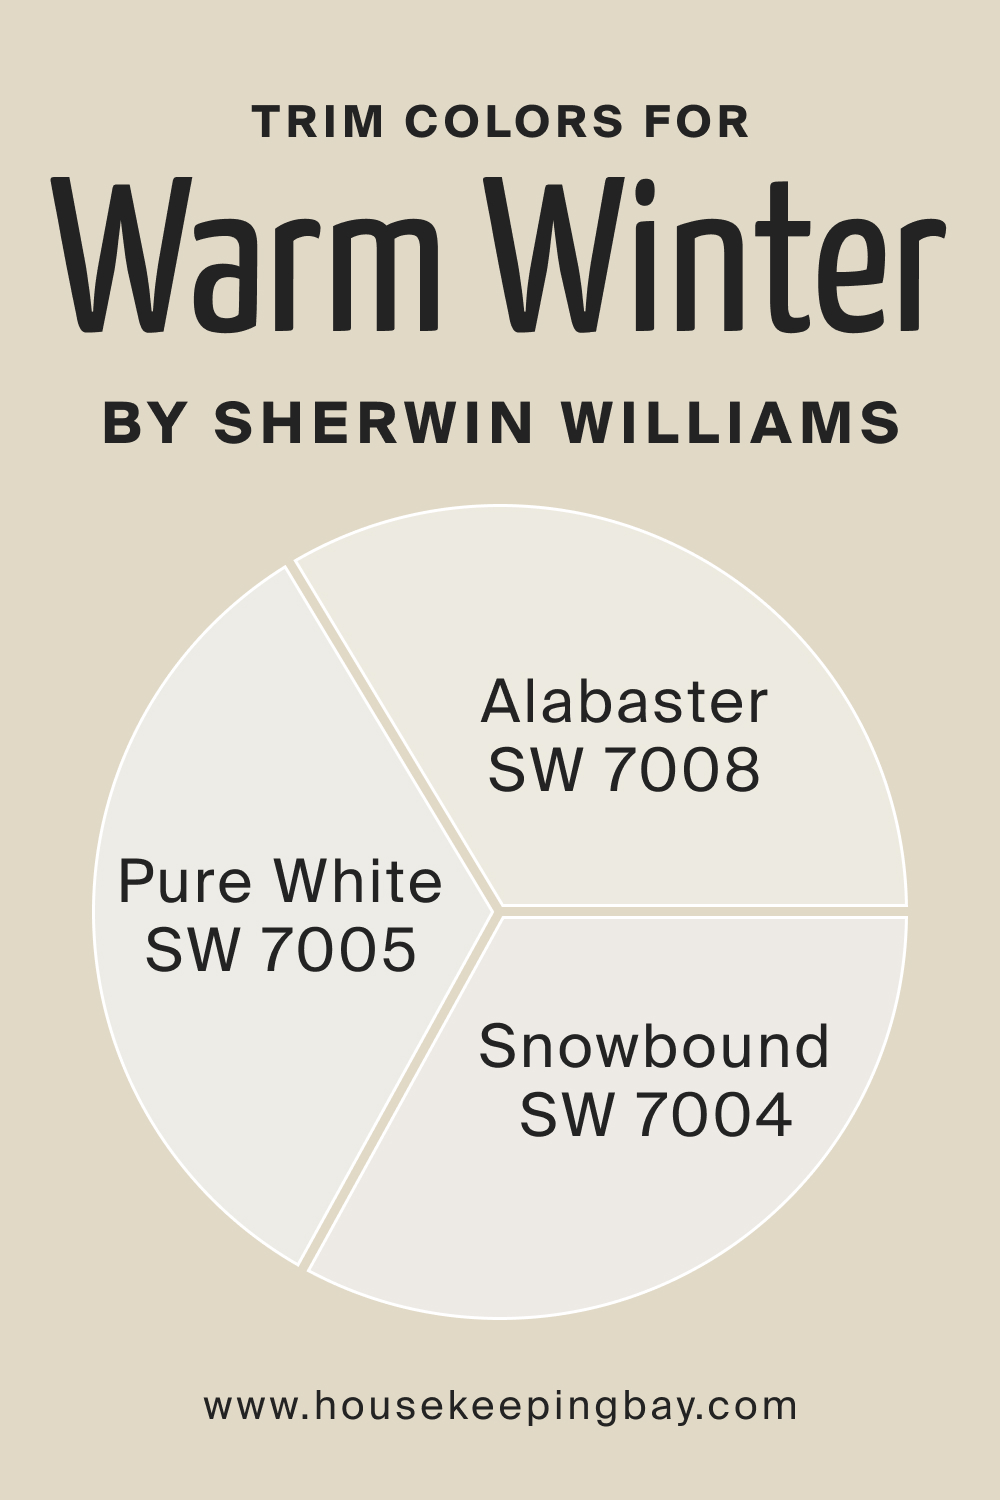 Trim Colors of SW 9506 Warm Winter by Sherwin Williams